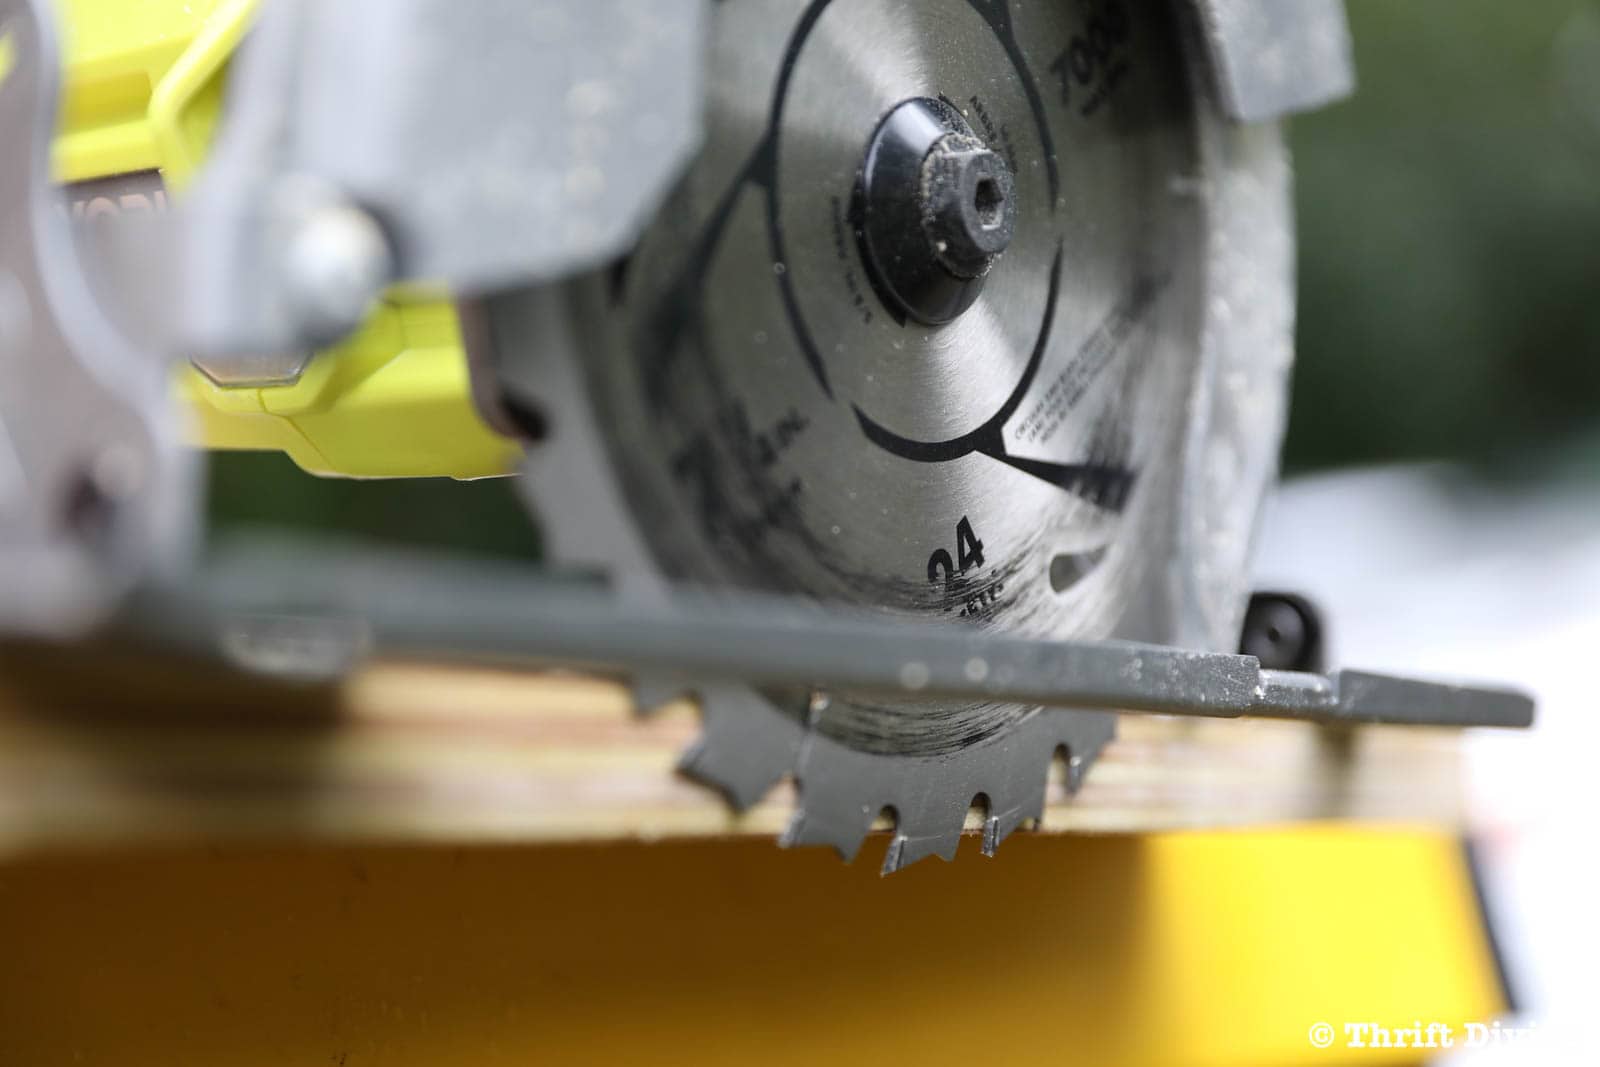 How to Use a Circular Saw - Blade should be lowered to a quarter inch below edge of wood - Thrift Diving